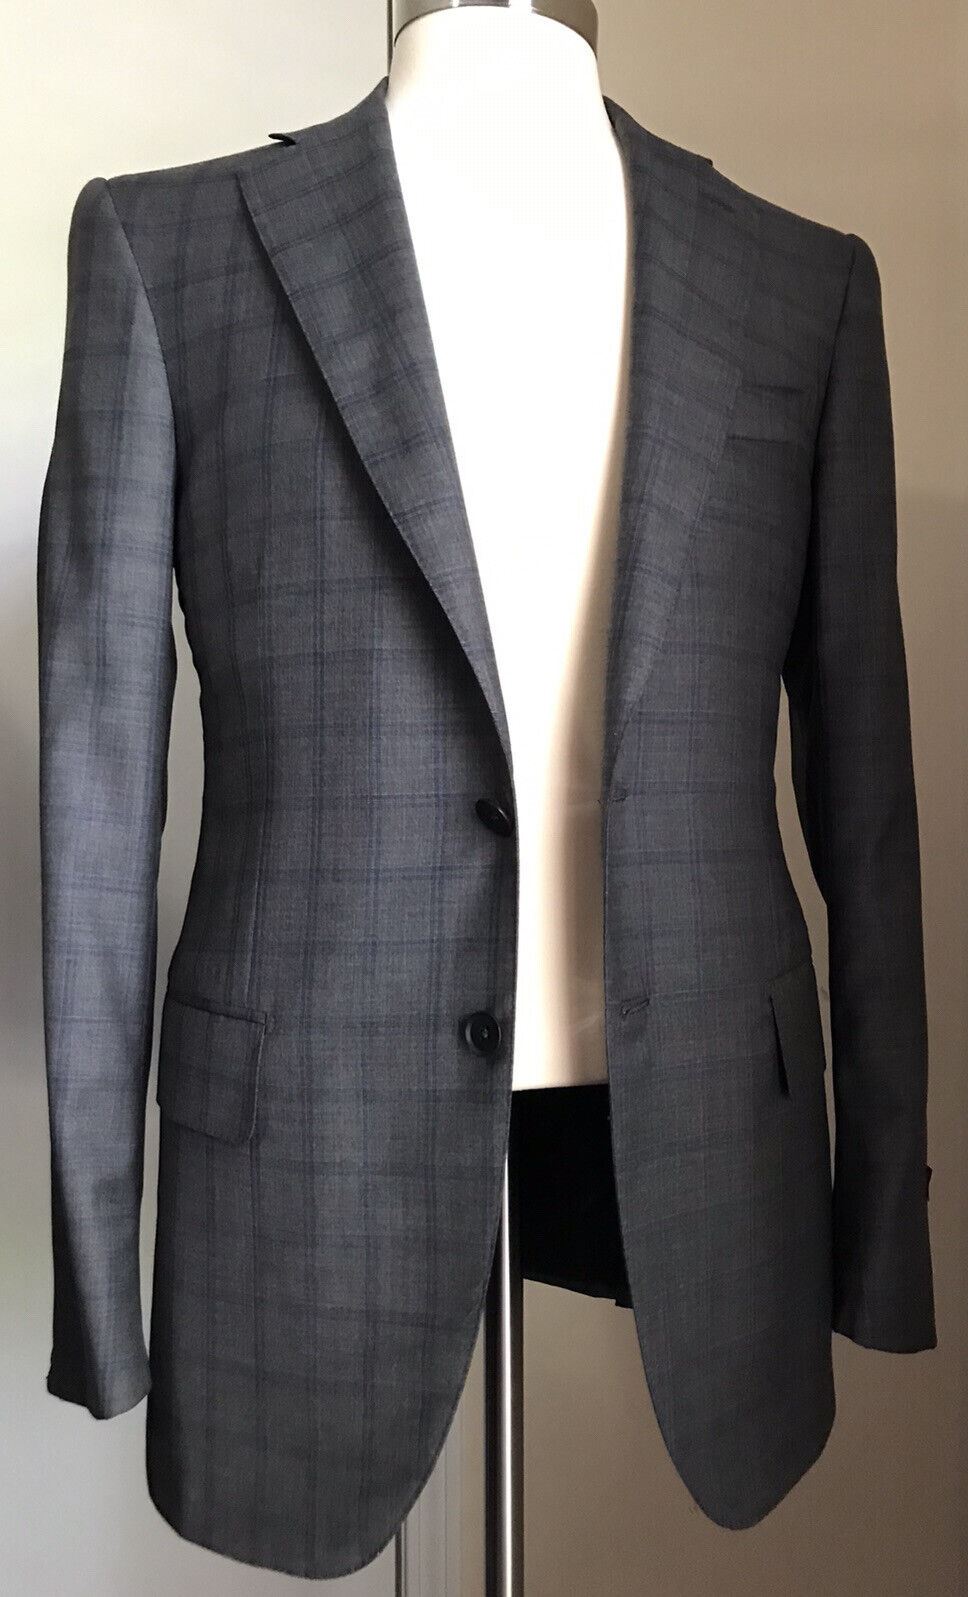 New $4995 ISAIA Super 170S Wool/Silk Suit DK Gray 38R US ( 48R Eu ) Italy